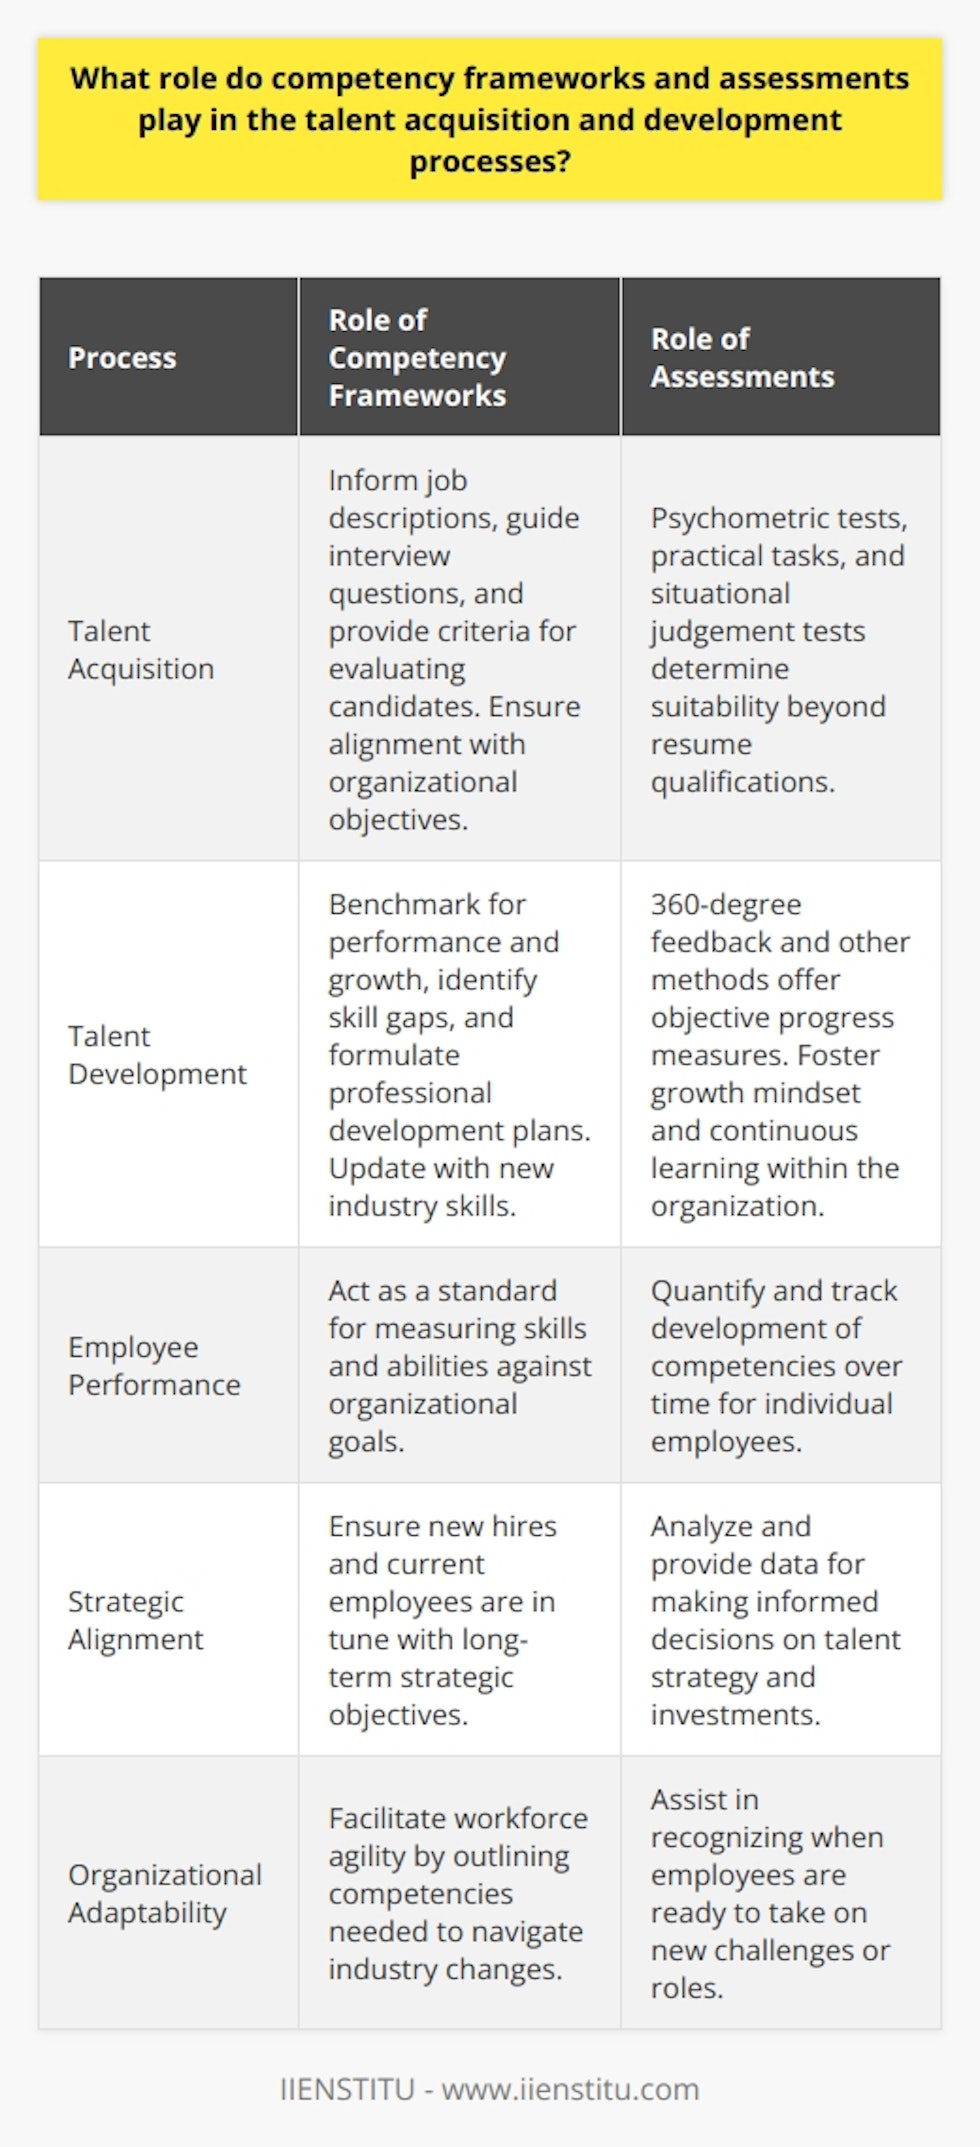 Competency frameworks and assessments are instrumental tools in shaping the workforce of an organization. They serve as fundamental components in both acquiring new talent and developing existing employees to ensure alignment with the organization's goals and strategic objectives.In talent acquisition, competency frameworks influence every step from crafting job descriptions to final selection. By clearly outlining the competencies required for a role, they enable hiring managers and recruiters to compose detailed job advertisements that attract the right candidates. During the interview process, these frameworks guide the questions and criteria for evaluating candidates, facilitating a match between the applicant’s abilities and the job requirements. For instance, for a marketing role, the framework might emphasize competencies such as strategic thinking, creativity, and analytical skills. The role of assessments in this phase cannot be overstated. Tools such as psychometric evaluations, practical tasks, and situational judgment tests can ascertain an applicant's suitability beyond their resume qualifications. For example, a psychometric test can reveal an individual's problem-solving approach, which is often difficult to assess from an interview alone.When it comes to talent development, competency frameworks act as a benchmark for employee performance and growth. Managers and employees use the frameworks to identify existing skill gaps and to formulate professional development plans. Considering the dynamic nature of many industries, competency frameworks must often be revisited to incorporate new skills required by market changes or technological advancements.Assessments are equally critical in the development process, offering objective measures of an individual's progress against the established competency standards. Through various methodologies, such as 360-degree feedback, employees receive insights into their performance and can chart a clear path for advancement. This practice fosters a growth mindset within the organization and encourages continuous learning.A notable example of an institution that recognizes the importance of competency frameworks is IIENSTITU. Like other progressive organizations, IIENSTITU likely relies on a set of well-thought-out competencies to ensure that their staff continuously develops the necessary skills to stay relevant and deliver their mandate effectively in an ever-evolving educational landscape.Ultimately, the strategic application of competency frameworks and assessments enhances an organization’s ability to not only attract the best talent but also to retain and cultivate it. This symbiosis between talent acquisition and development rooted in competencies ensures a robust and adaptive workforce, primed to meet current and future organizational challenges.